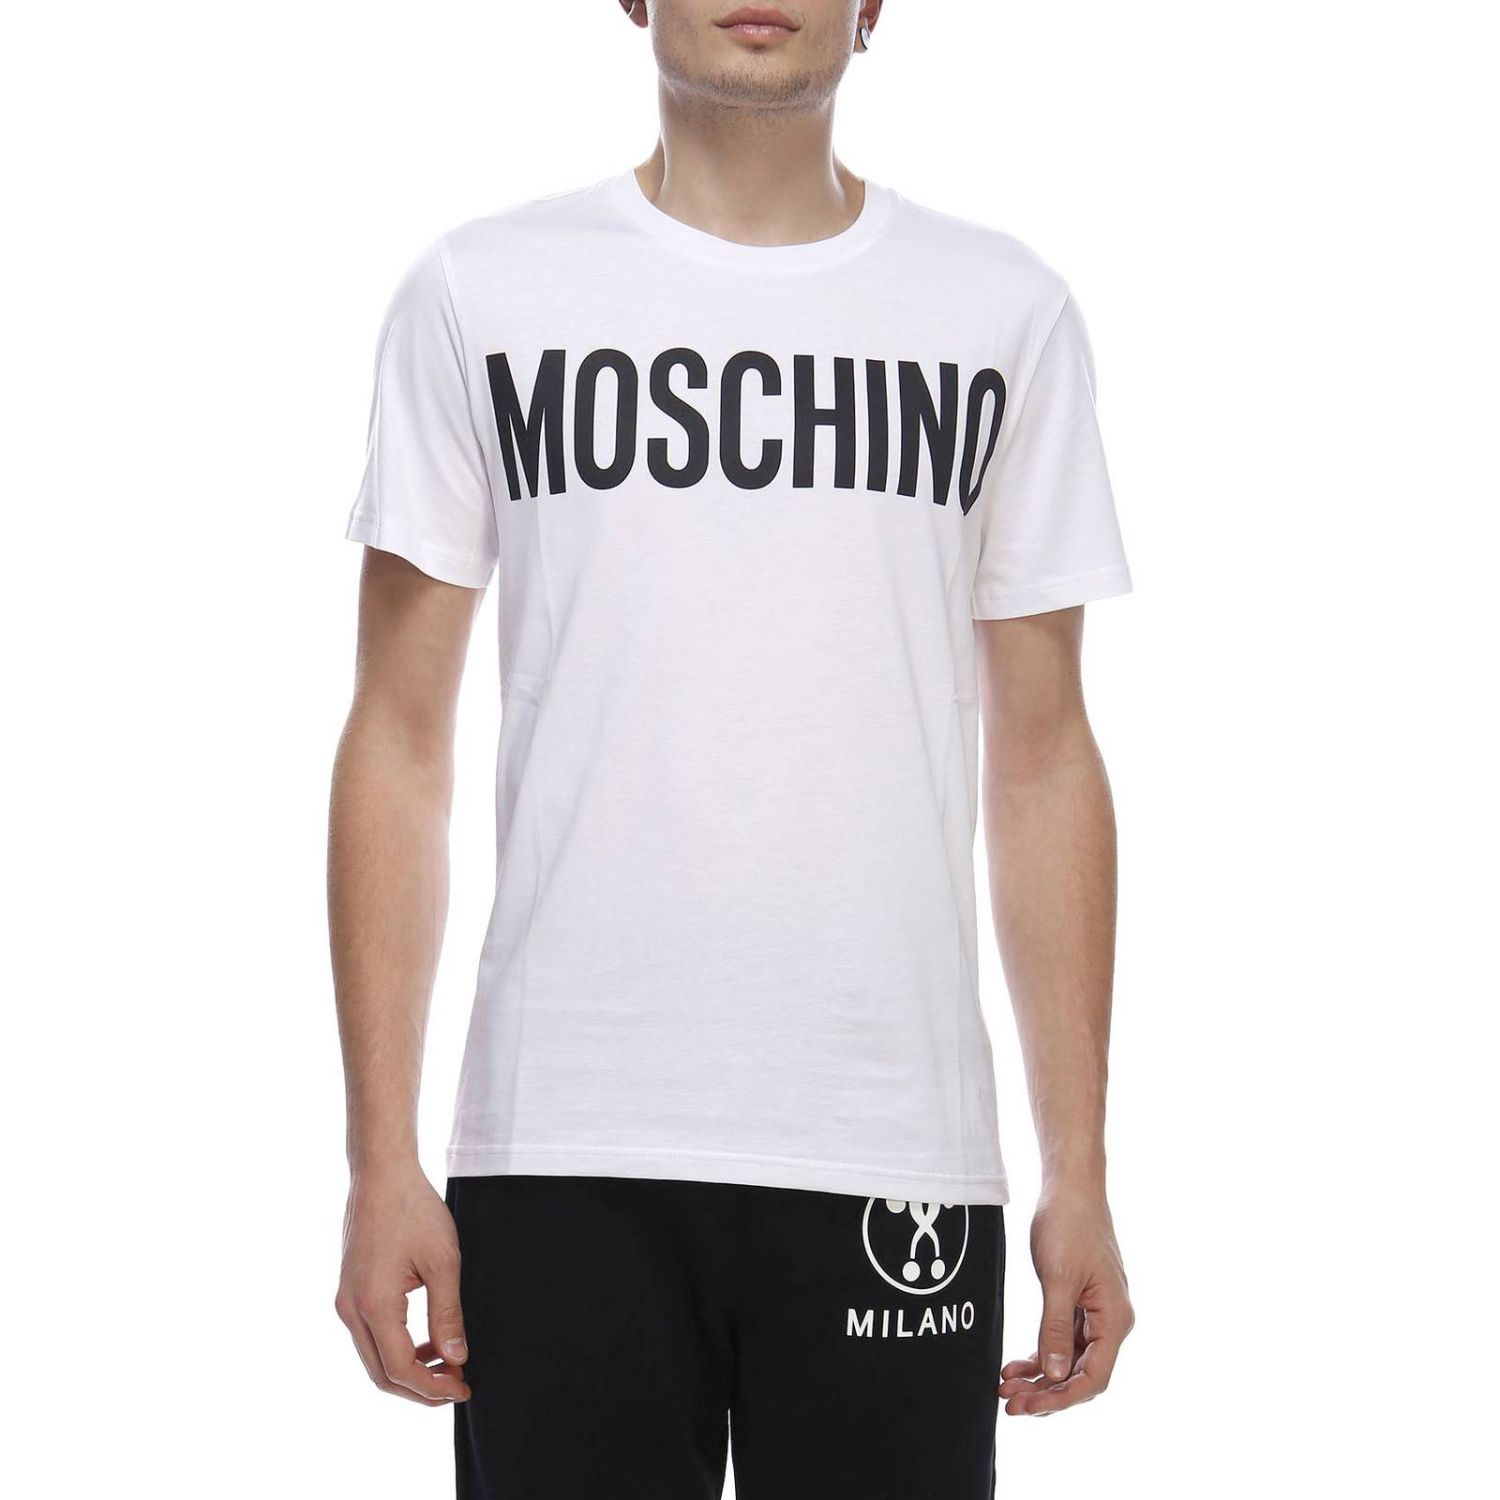 Moschino Couture Outlet: T-shirt men | T-Shirt Moschino Couture Men ...